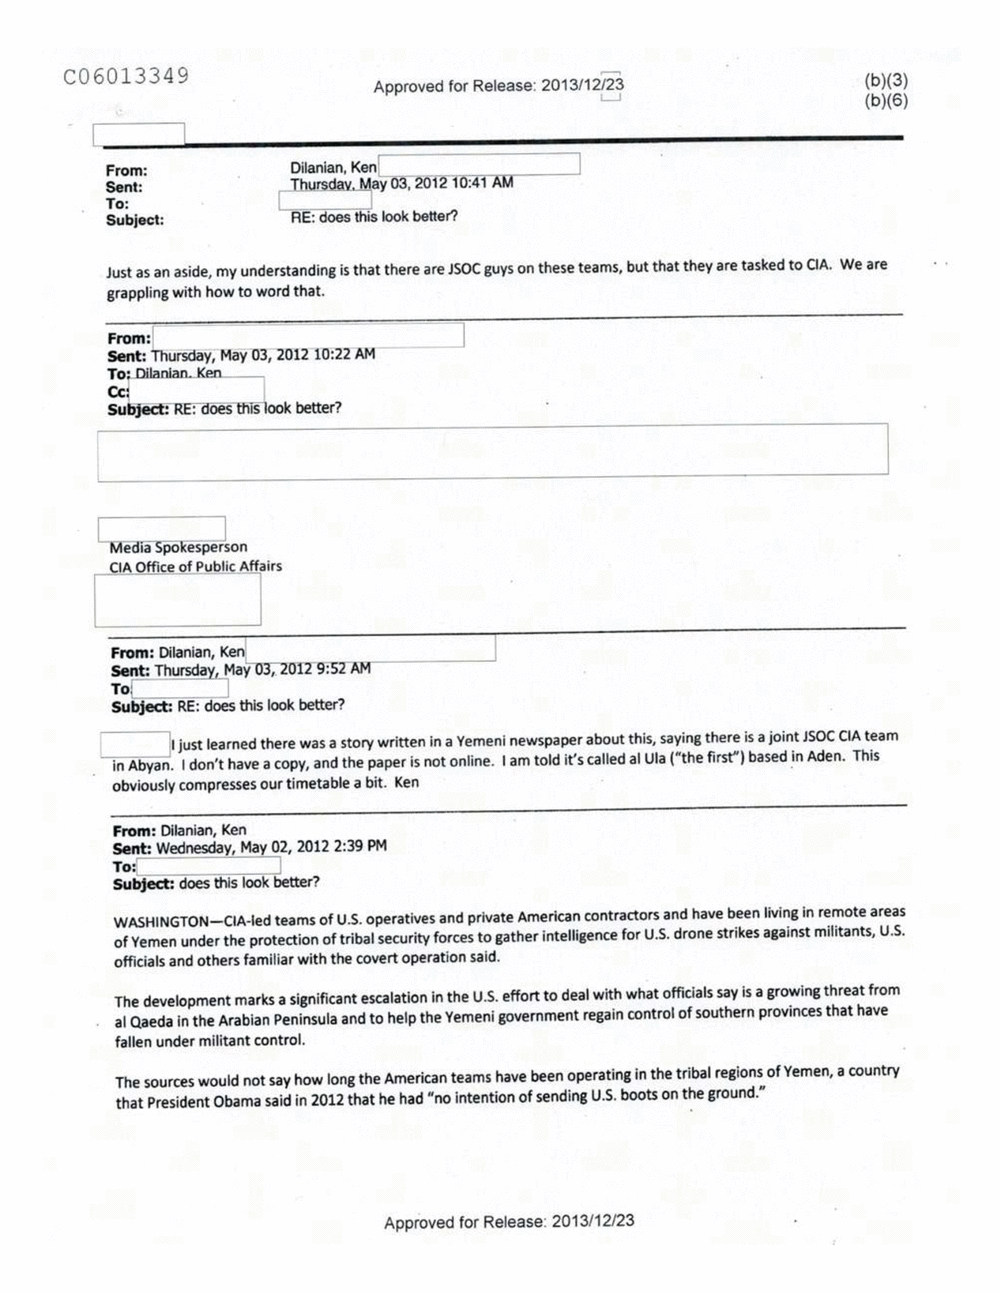 Page 259 from Email Correspondence Between Reporters and CIA Flacks